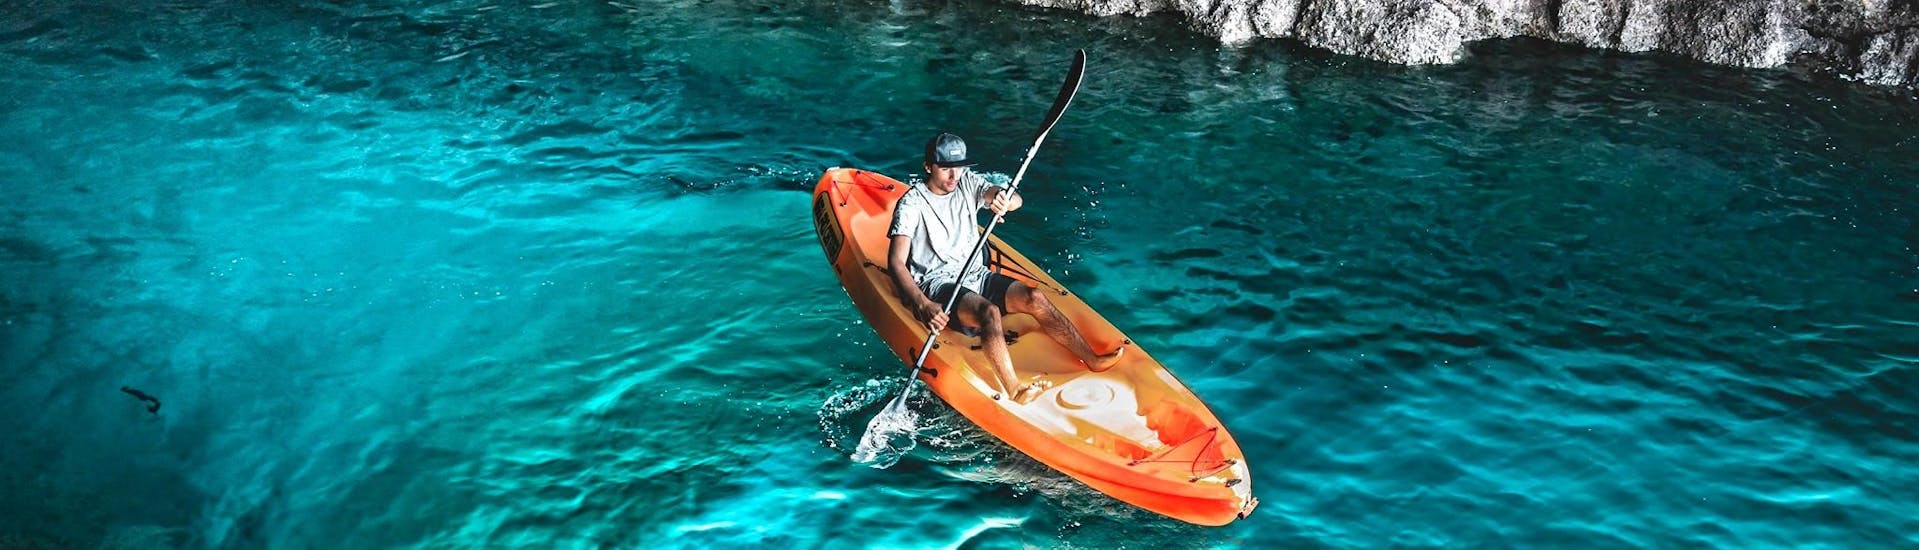 While Sea Kayaking in Arrábida Natural Park from Sesimbra wit Meira Pro Center Sesimbra, a participant is exploring the magical sea caves of the coast with his kayak.